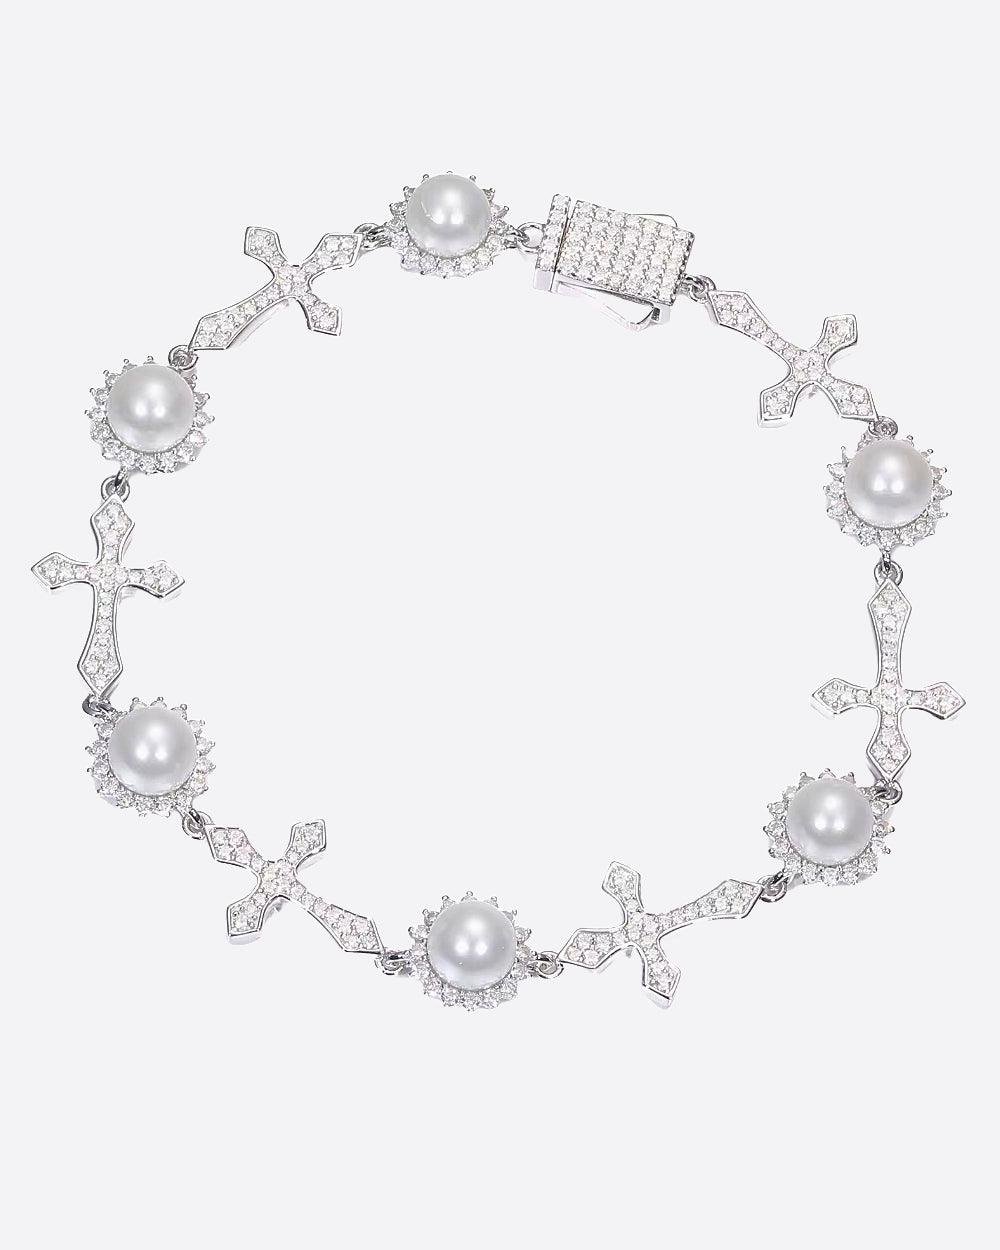 MOISSANITE ICY CROSSES & PEARLS BRACELET. - WHITE GOLD - DRIP IN THE JEWEL